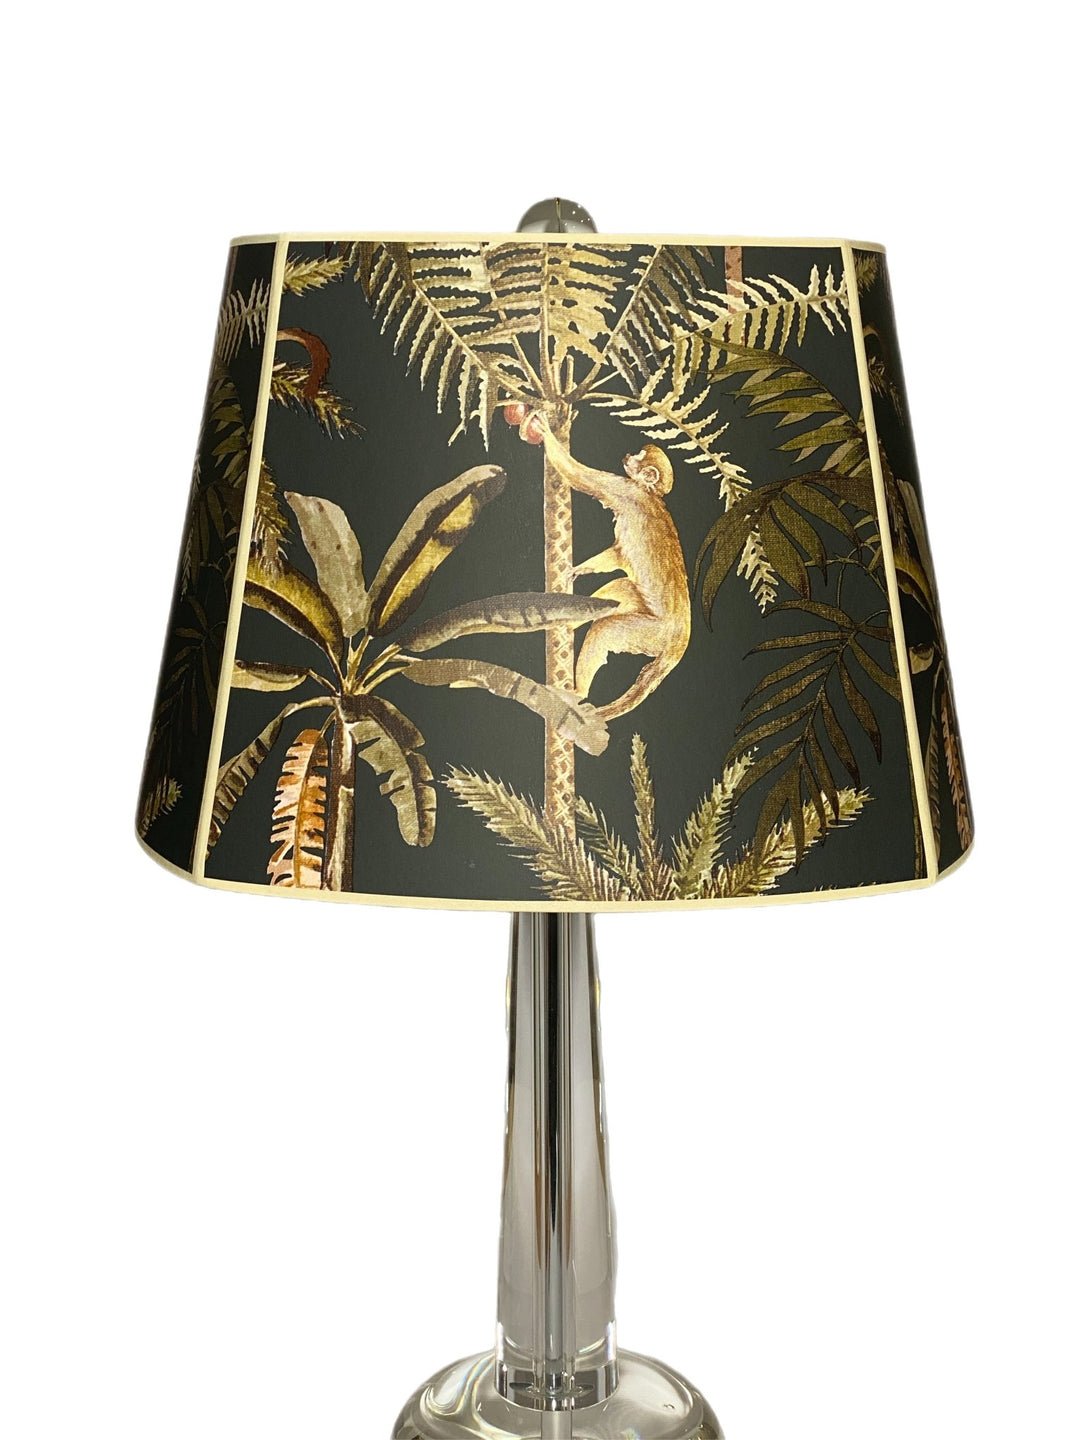 Custom Shade made with Wallpaper - Lux Lamp Shades